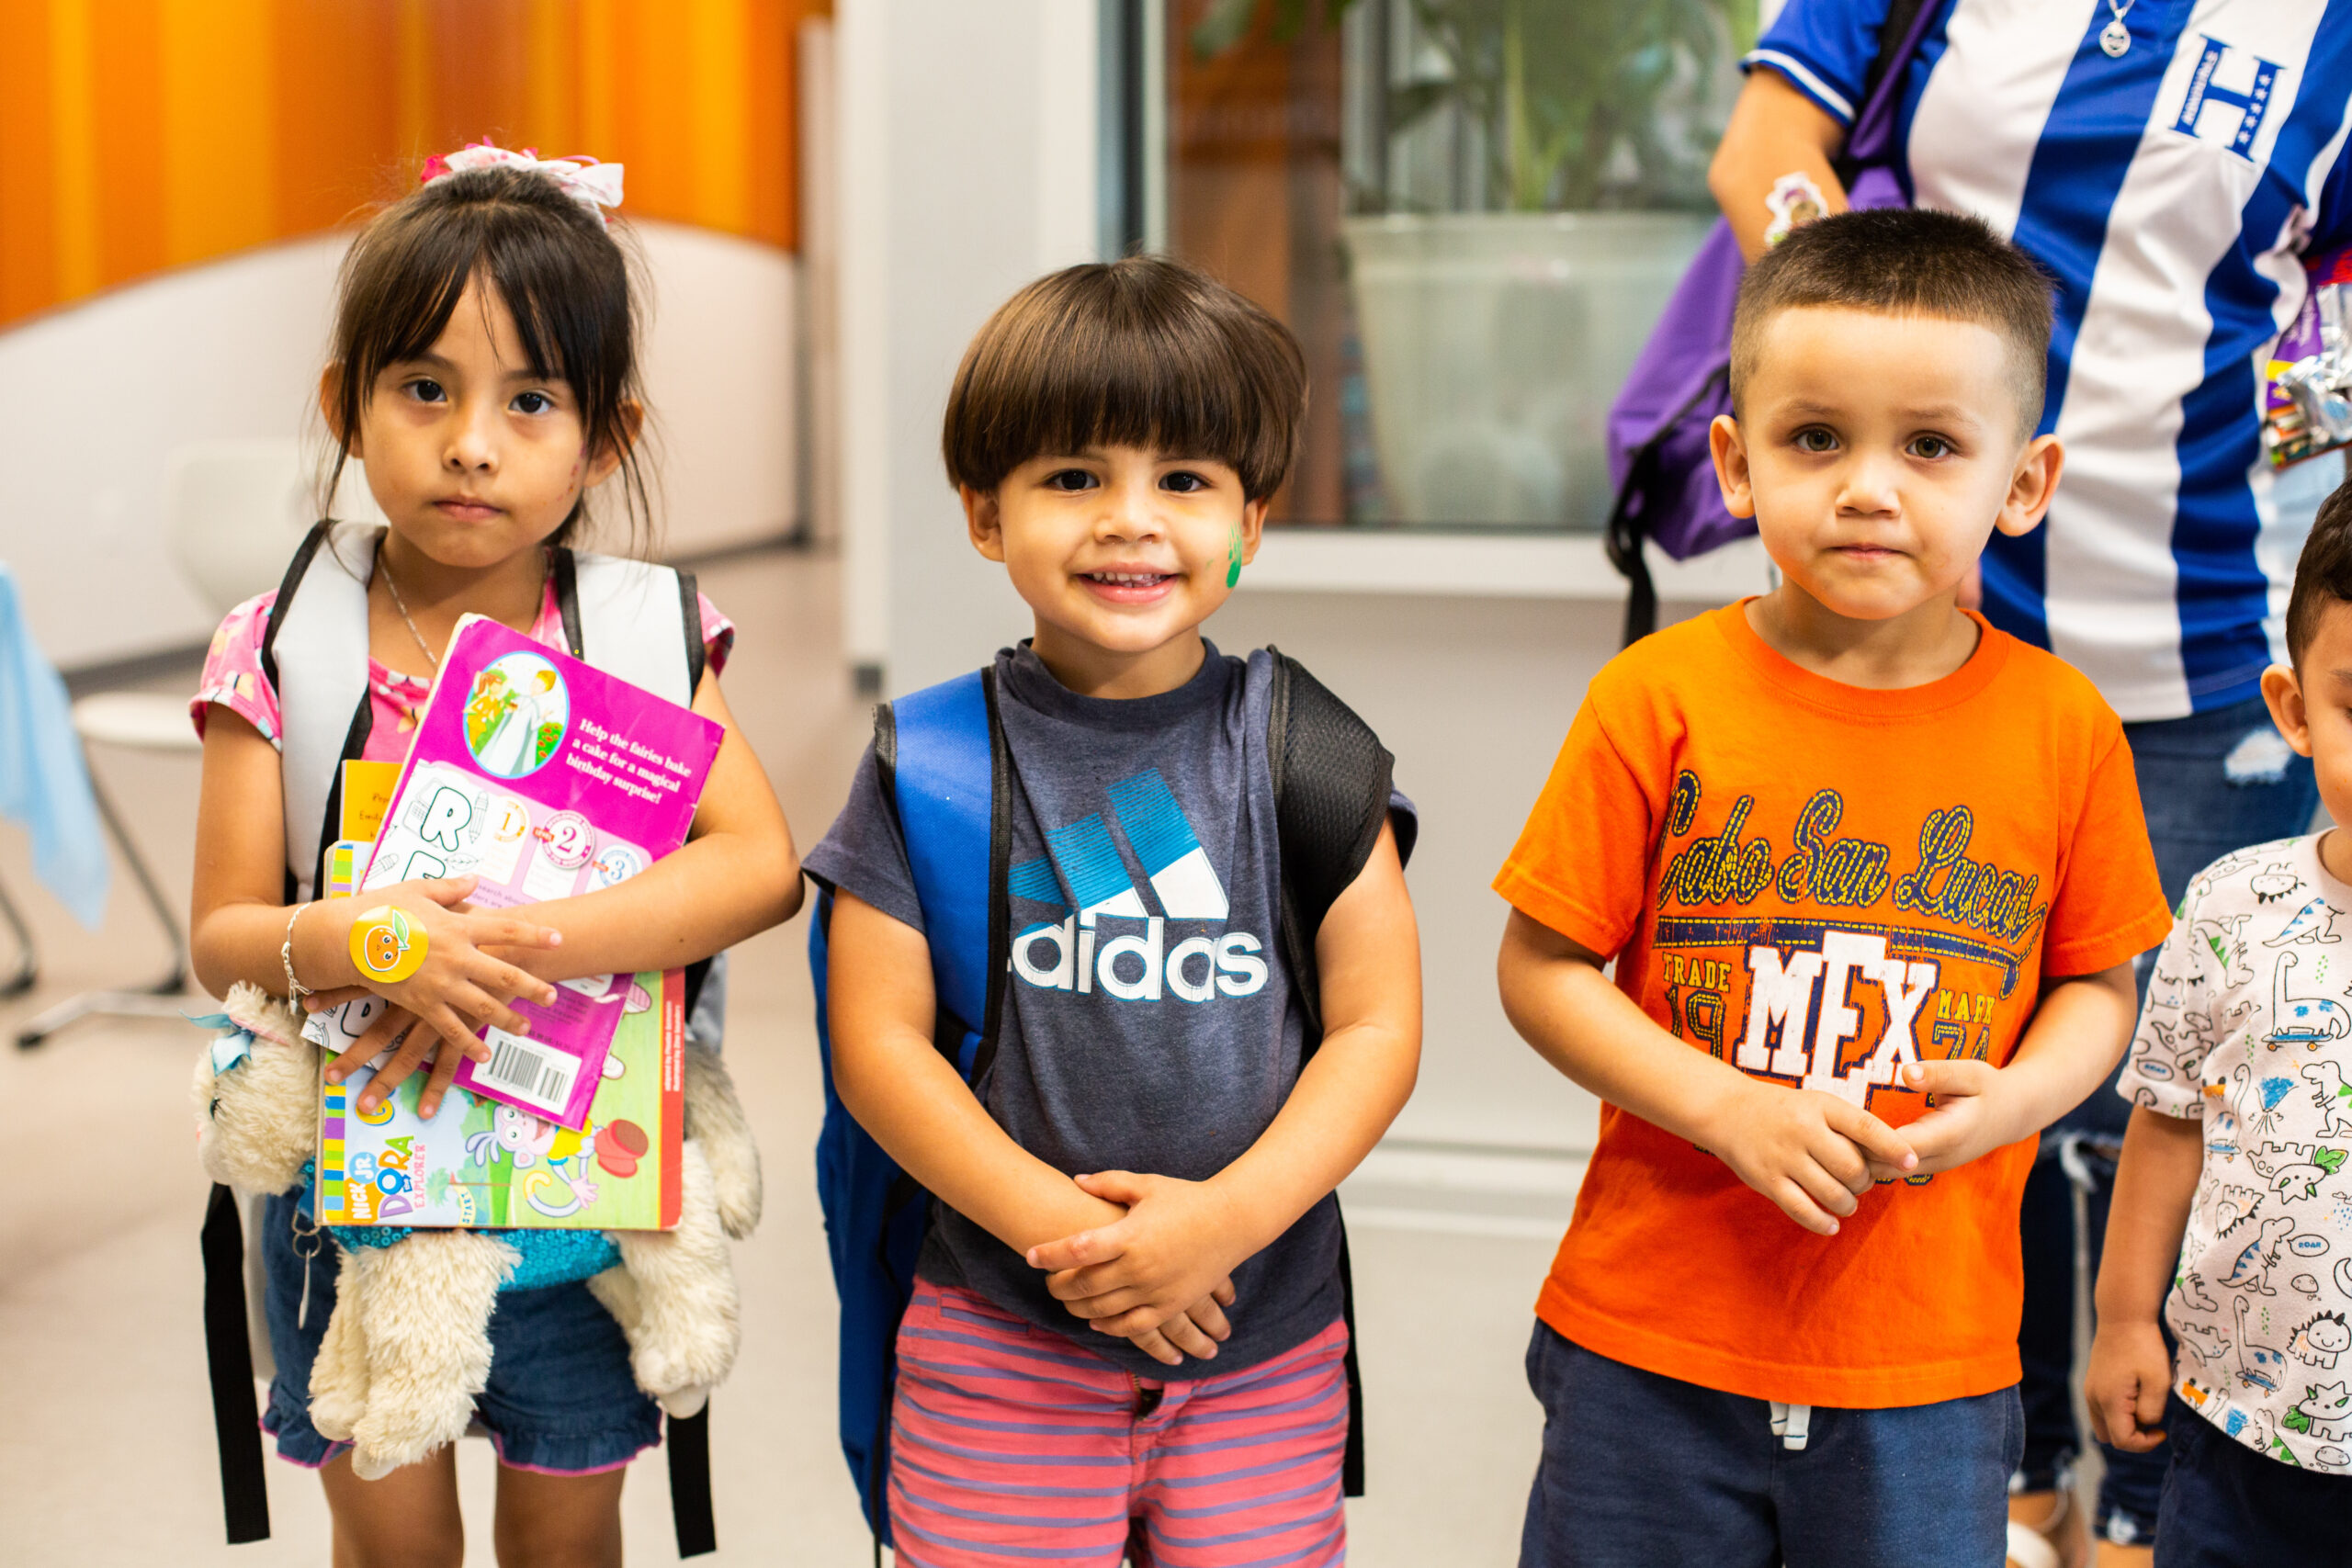 21 free back-to-school resources in Greater Austin